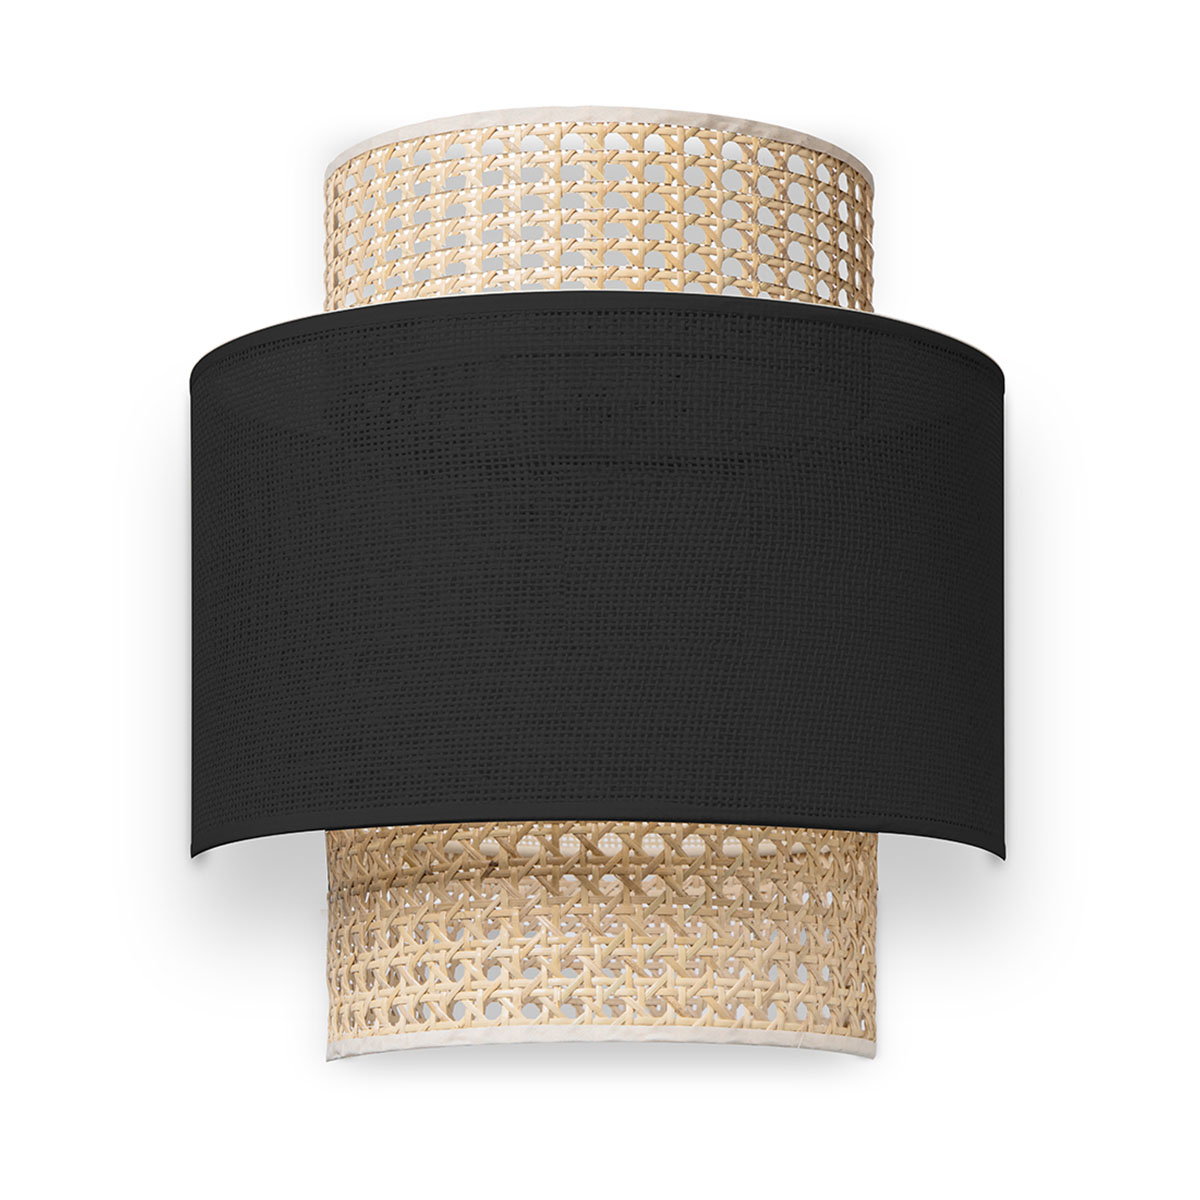 Tangla lighting - TLW7086-01BNT - LED wall lamp 1 Light - paper rattan and linen in natural and black - arch - E27